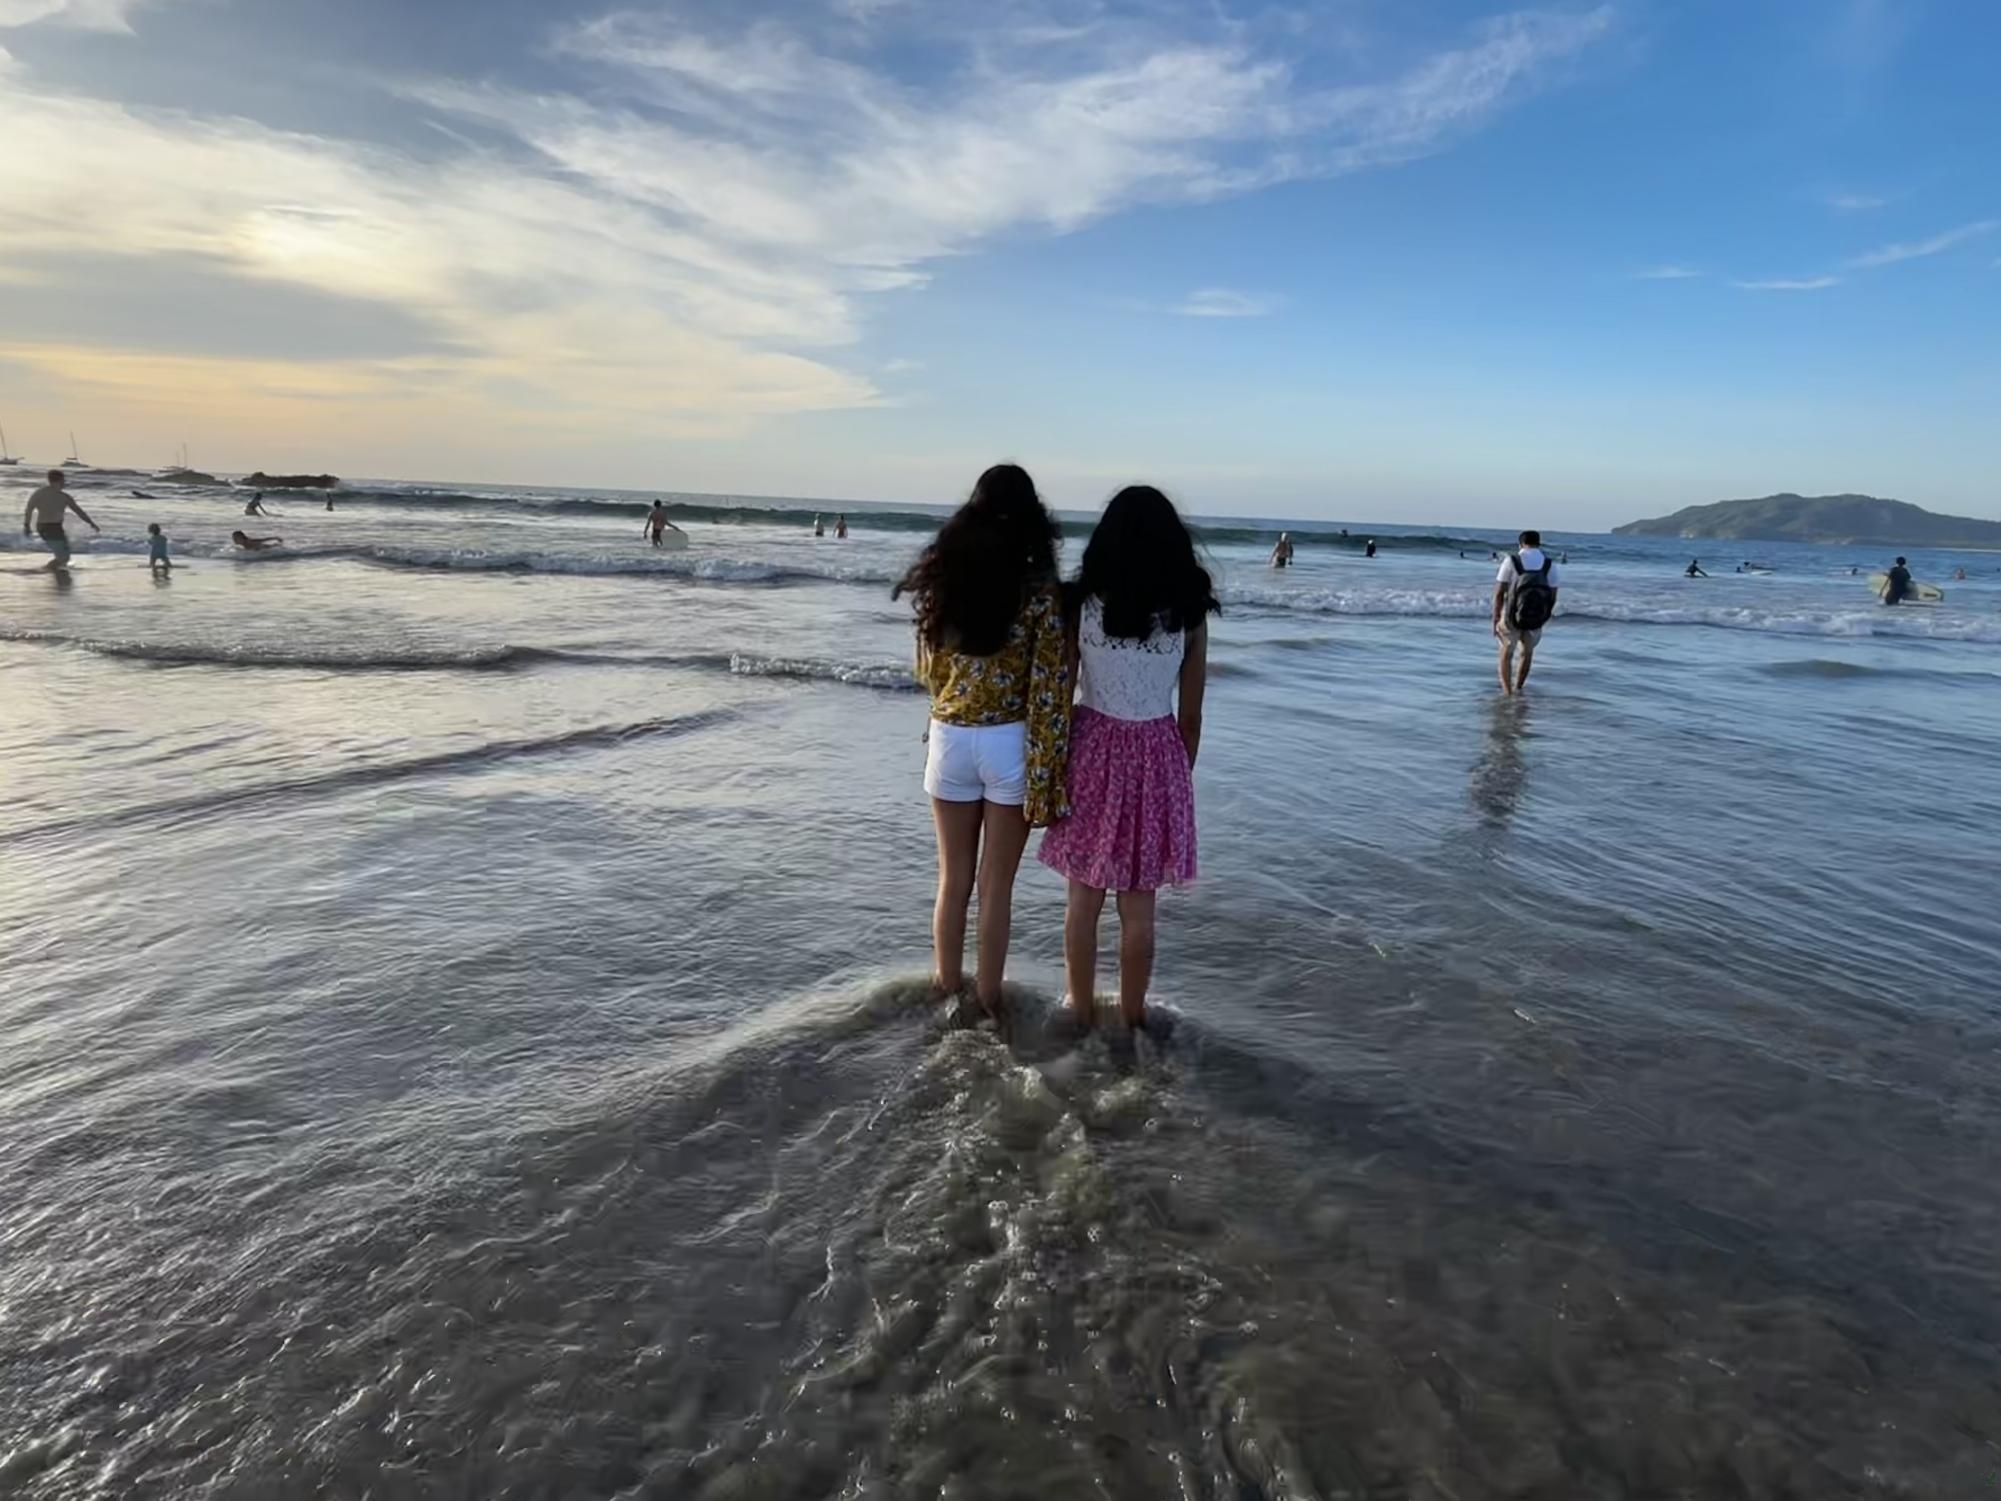 Looking out into the ocean with her sister, junior Anisha Mandem enjoys the scenic views of Costa Rica. This was such an amazing experience, not only because of the views, but because of the amazing culture and language I got to experience, Mandem said. I would love to go back in the future.  